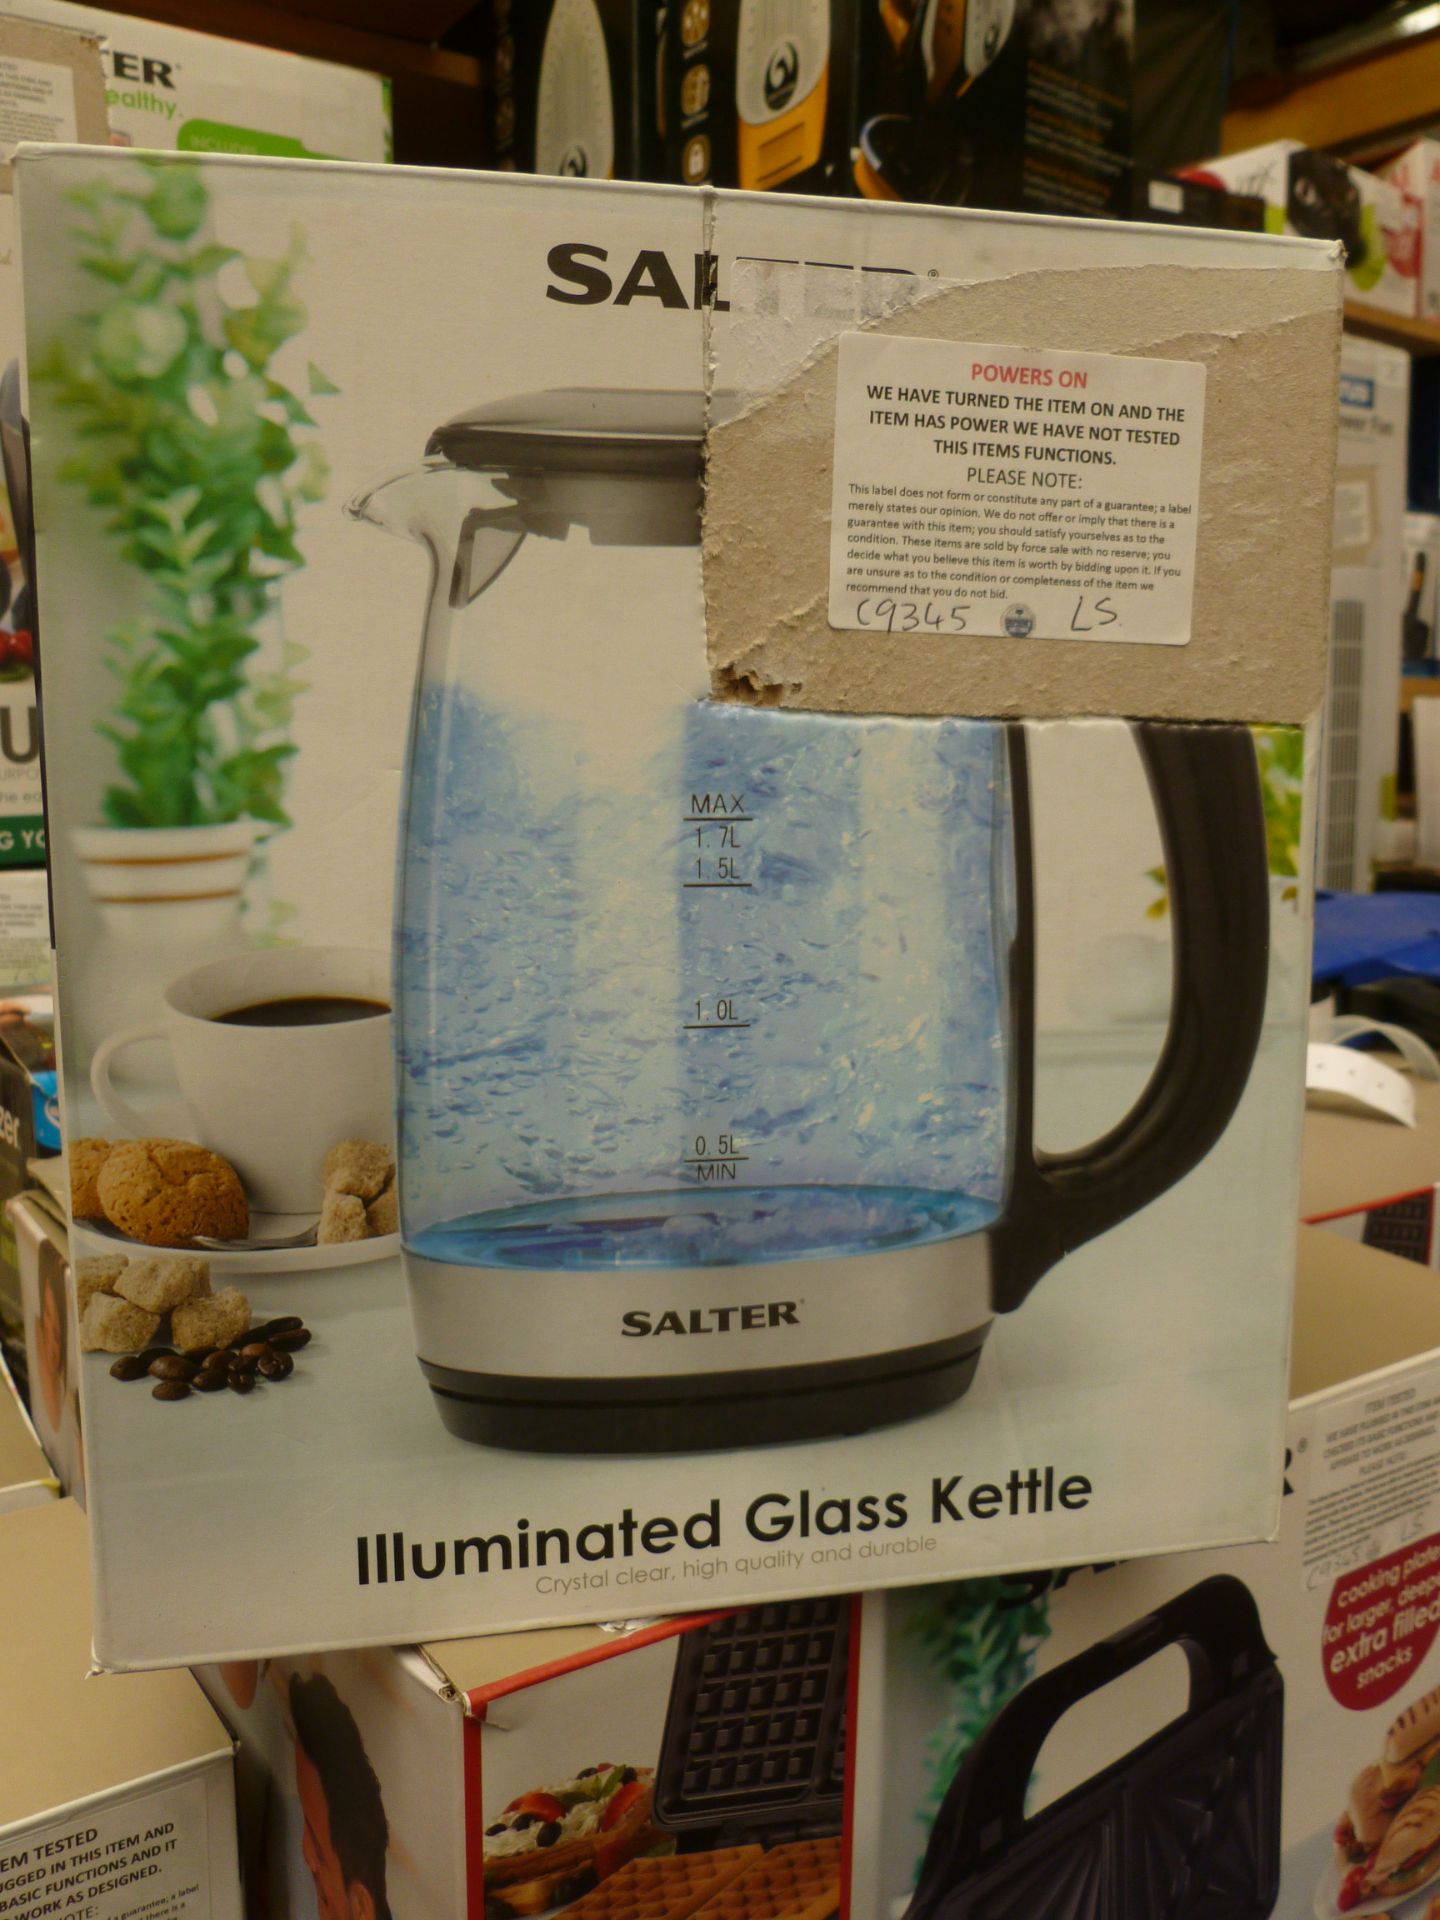 Salter illuminated glass kettle, tested working and boxed.